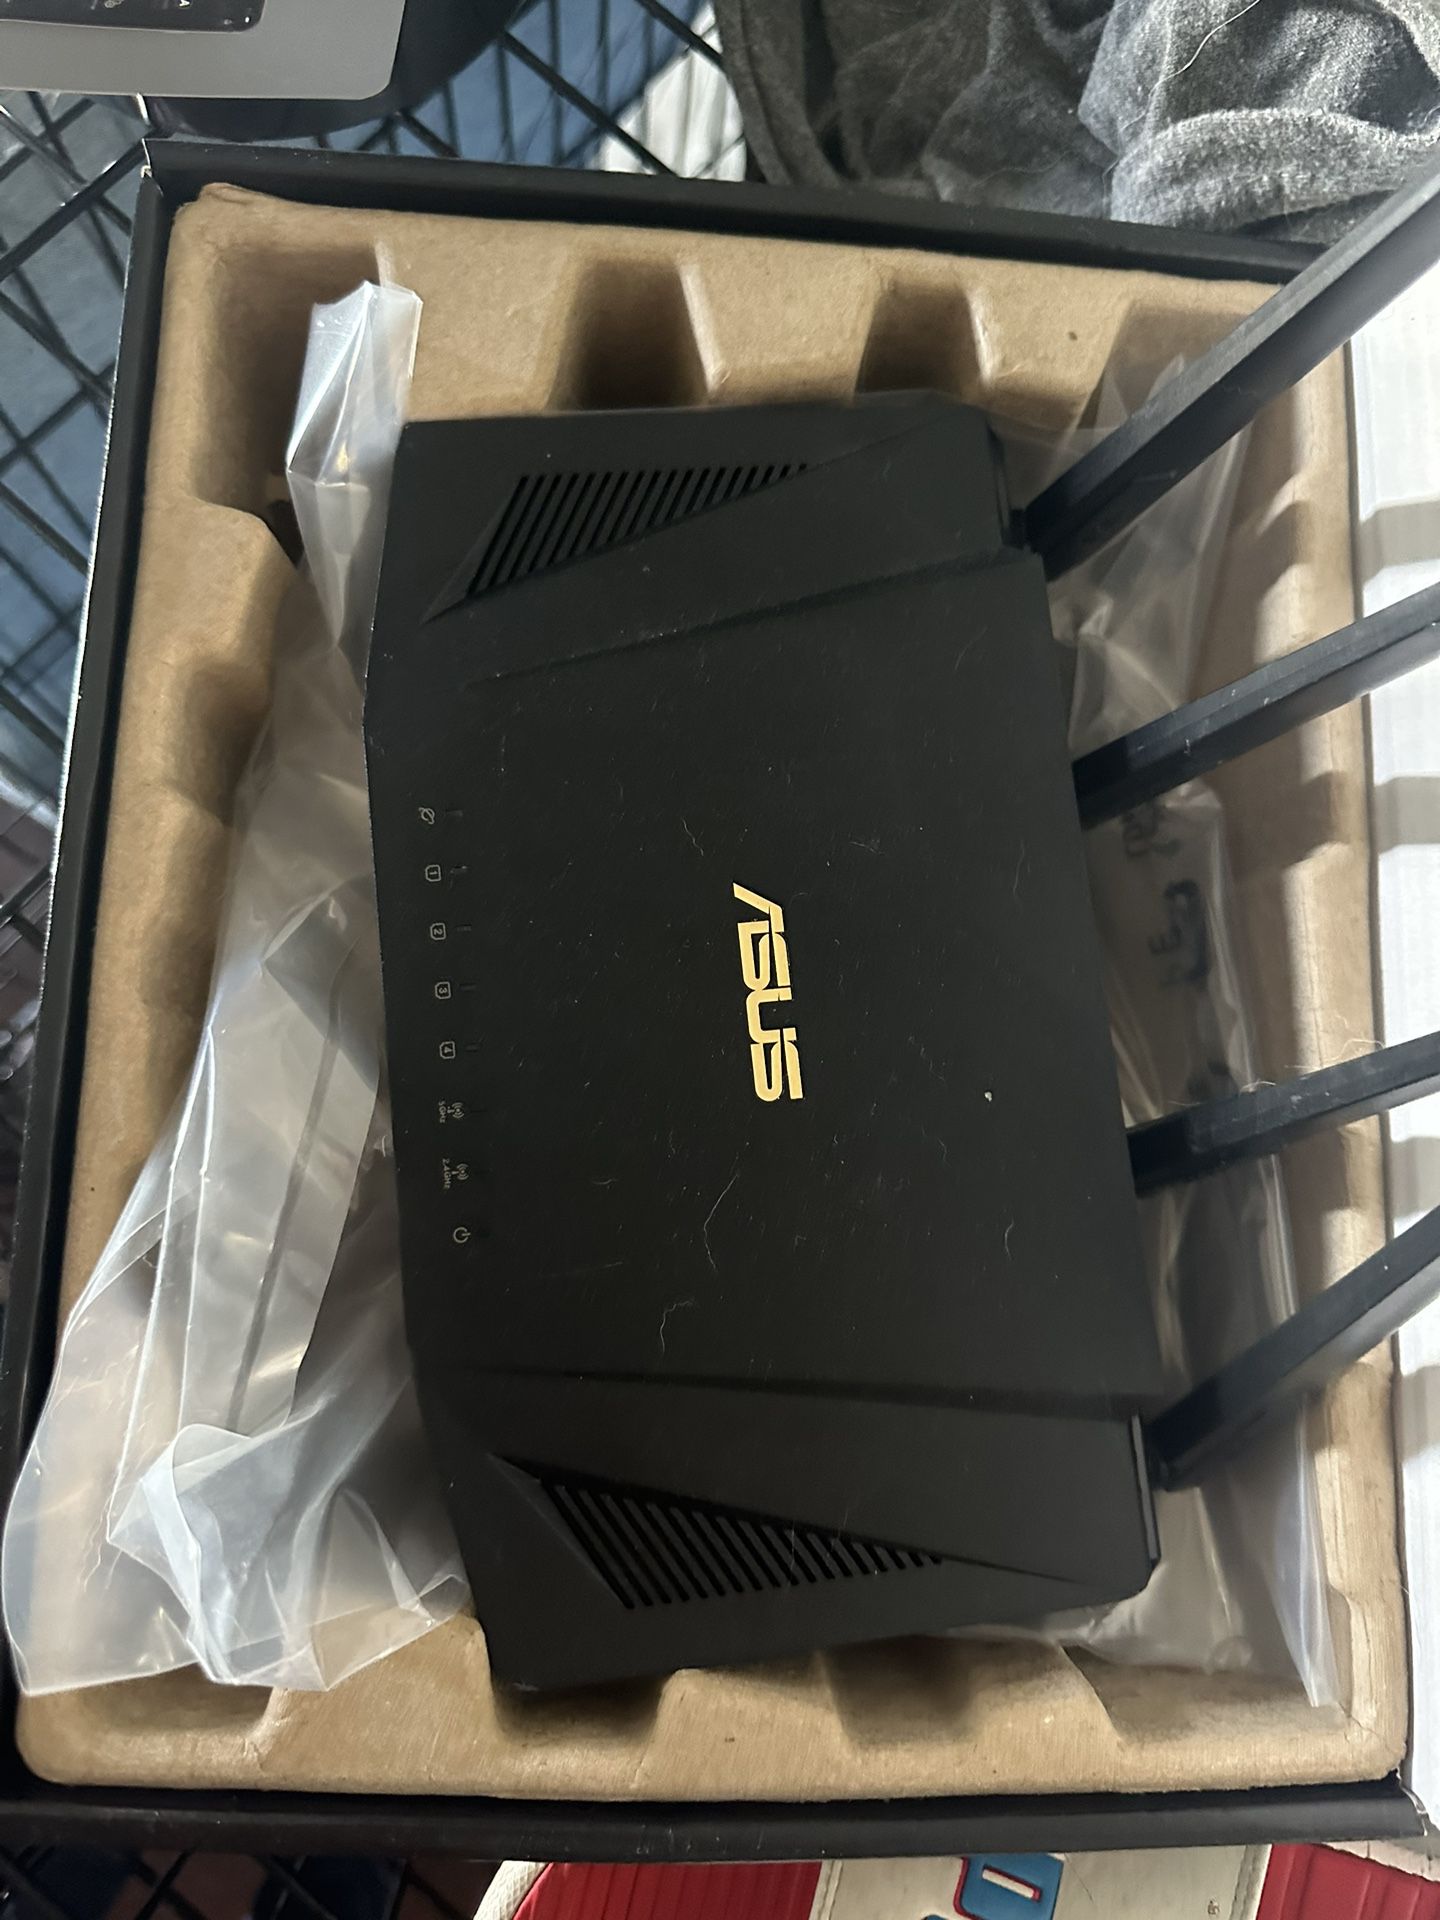 ASUS - AX3000 Dual-Band WiFi 6 Wireless Router